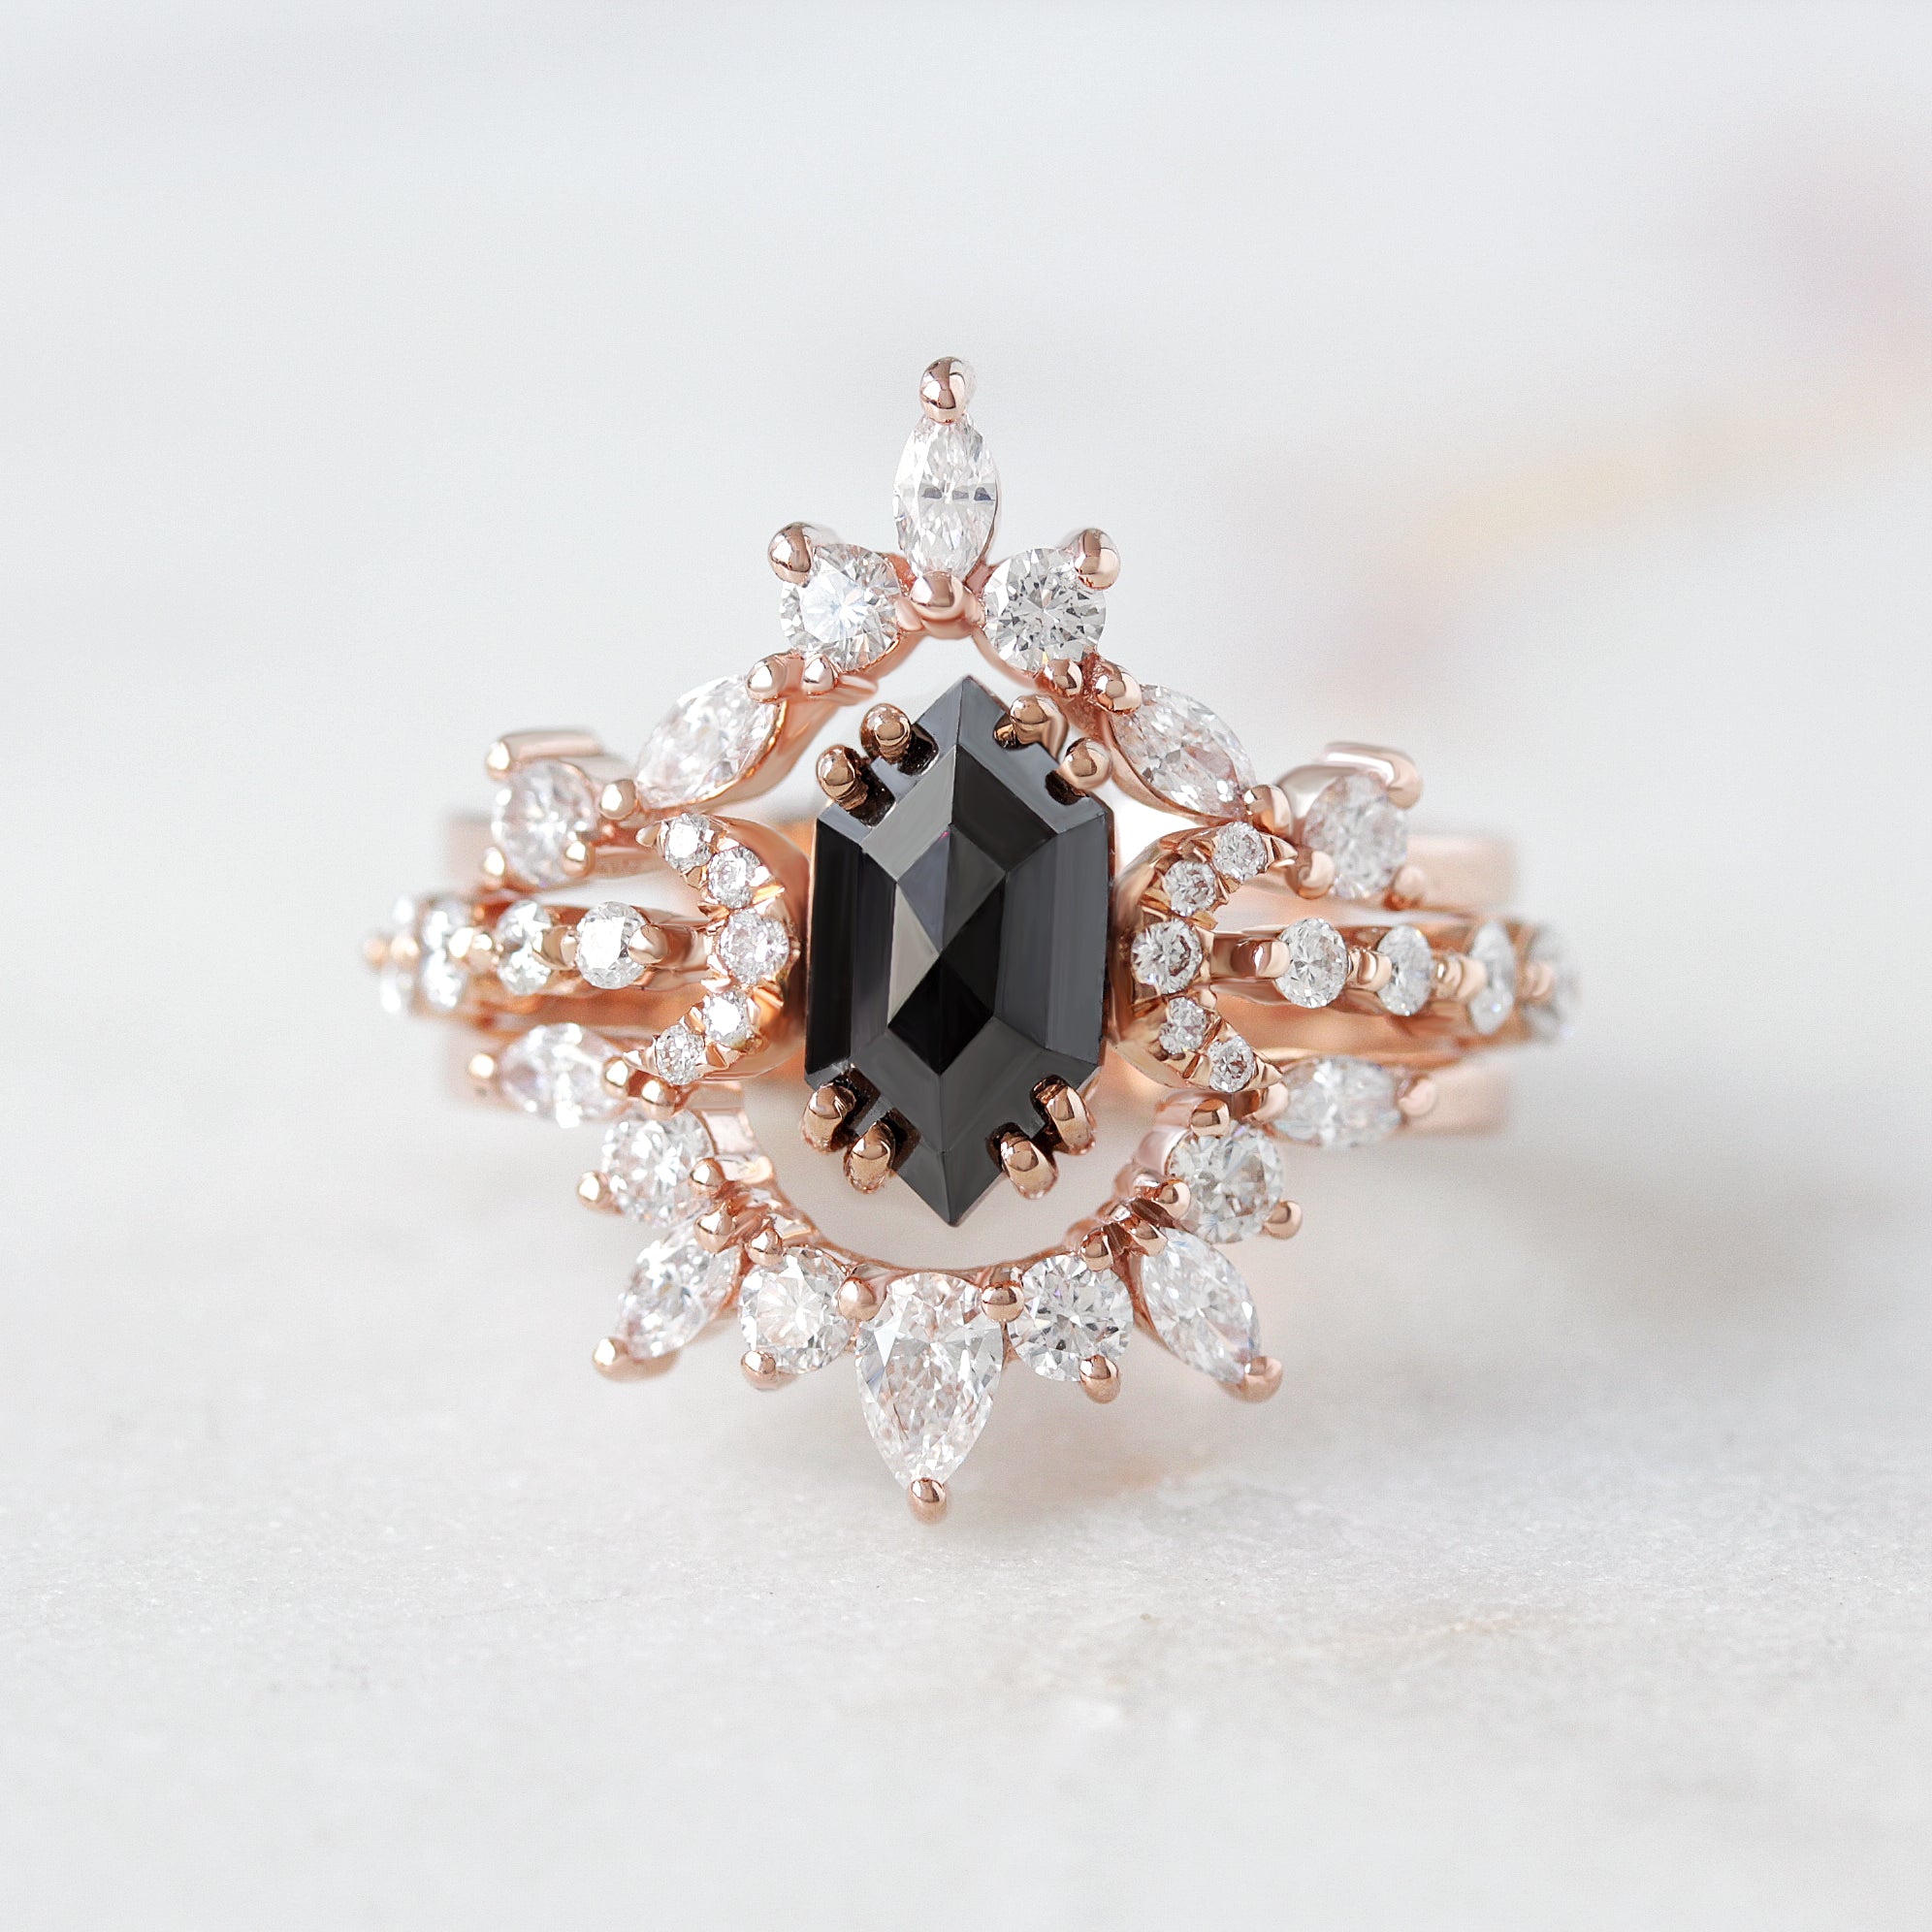 Pear and Marquise Diamond Curved Unique Wedding Nesting Ring - Ray ♥